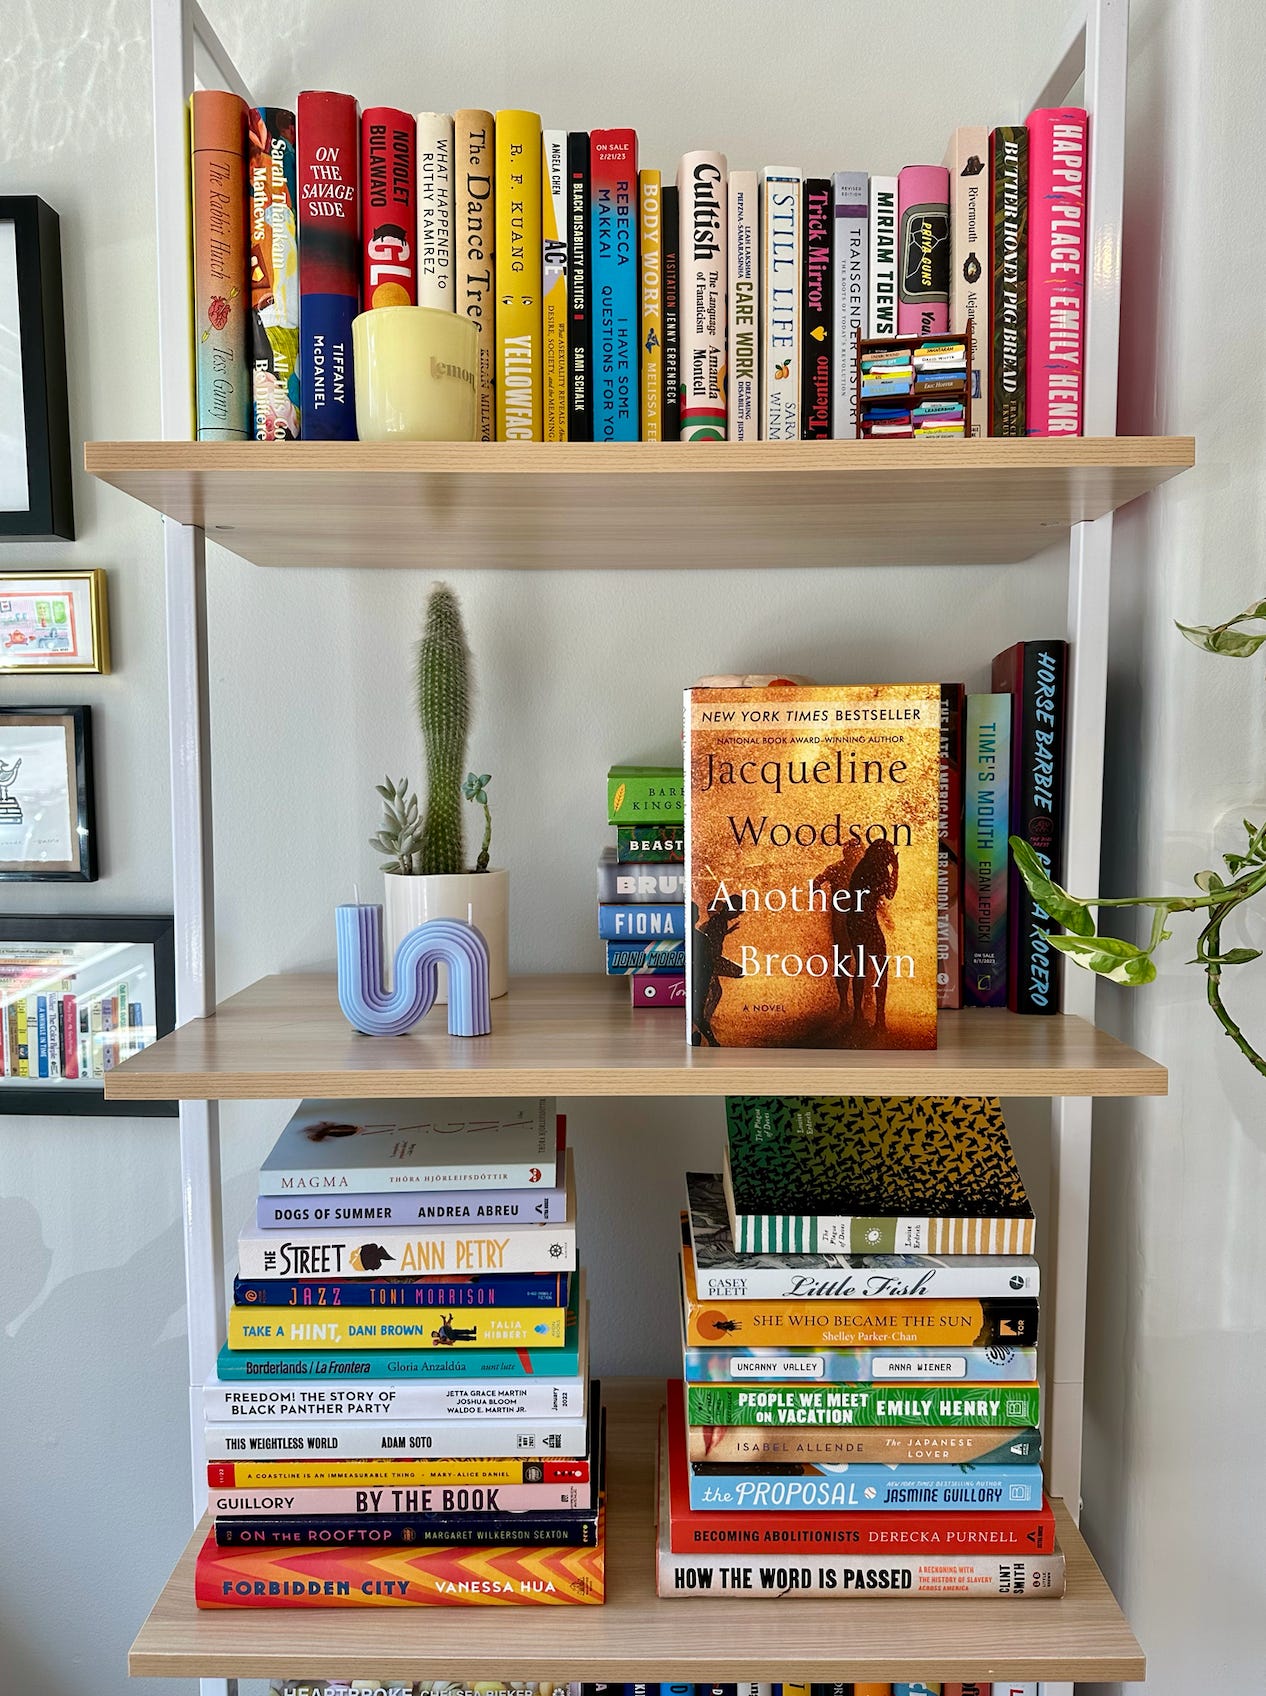 A bookshelf with Another Brooklyn facing outwards.